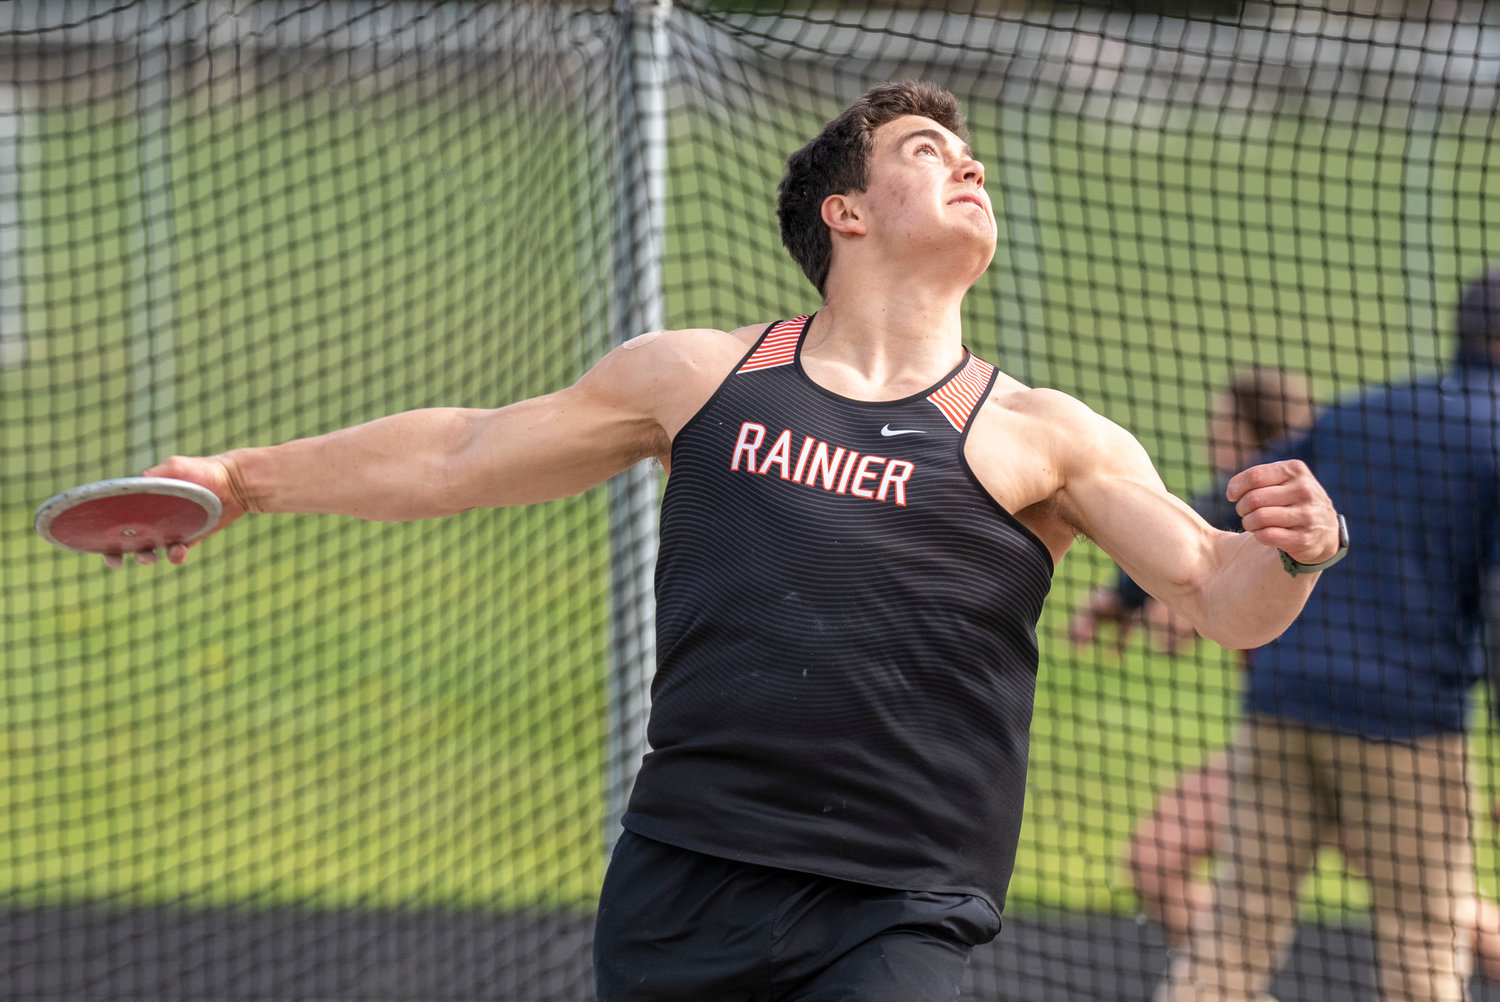 Rainier senior Jeremiah Nubbe won the boys discus with a toss of 202 feet, 7.5 inches during a track meet at Napavine High School on March 31.